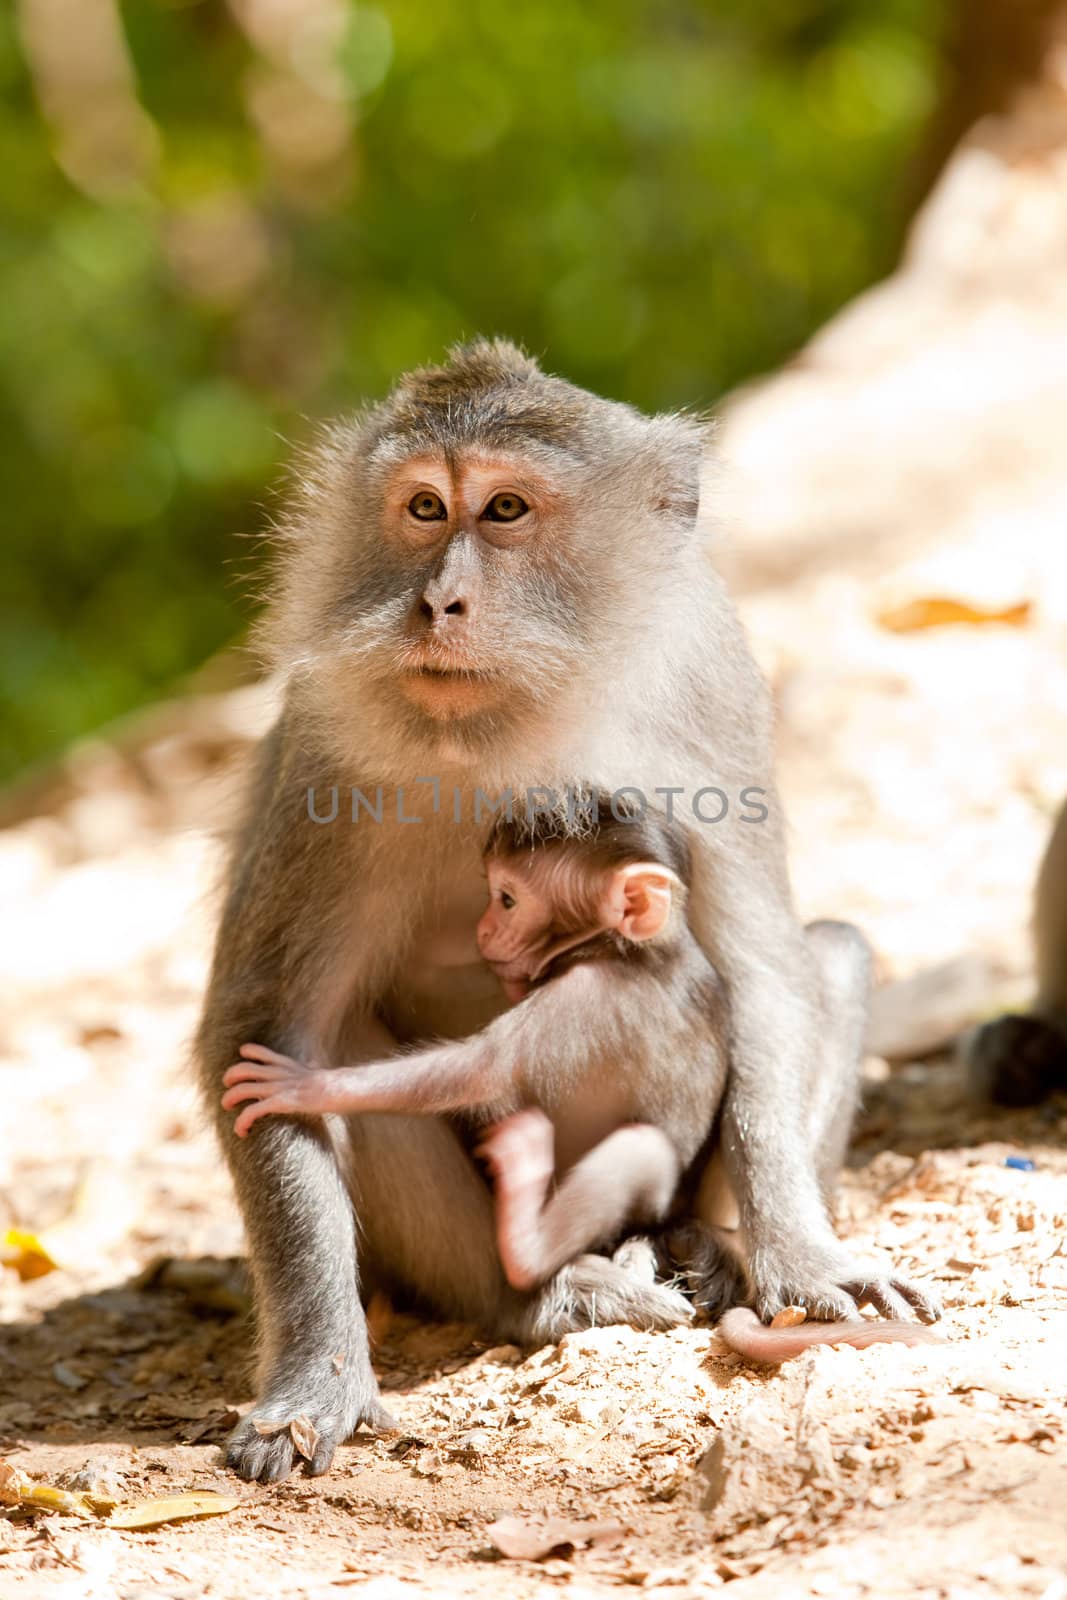 Mother macaque with her young by the roadside, Indonesia